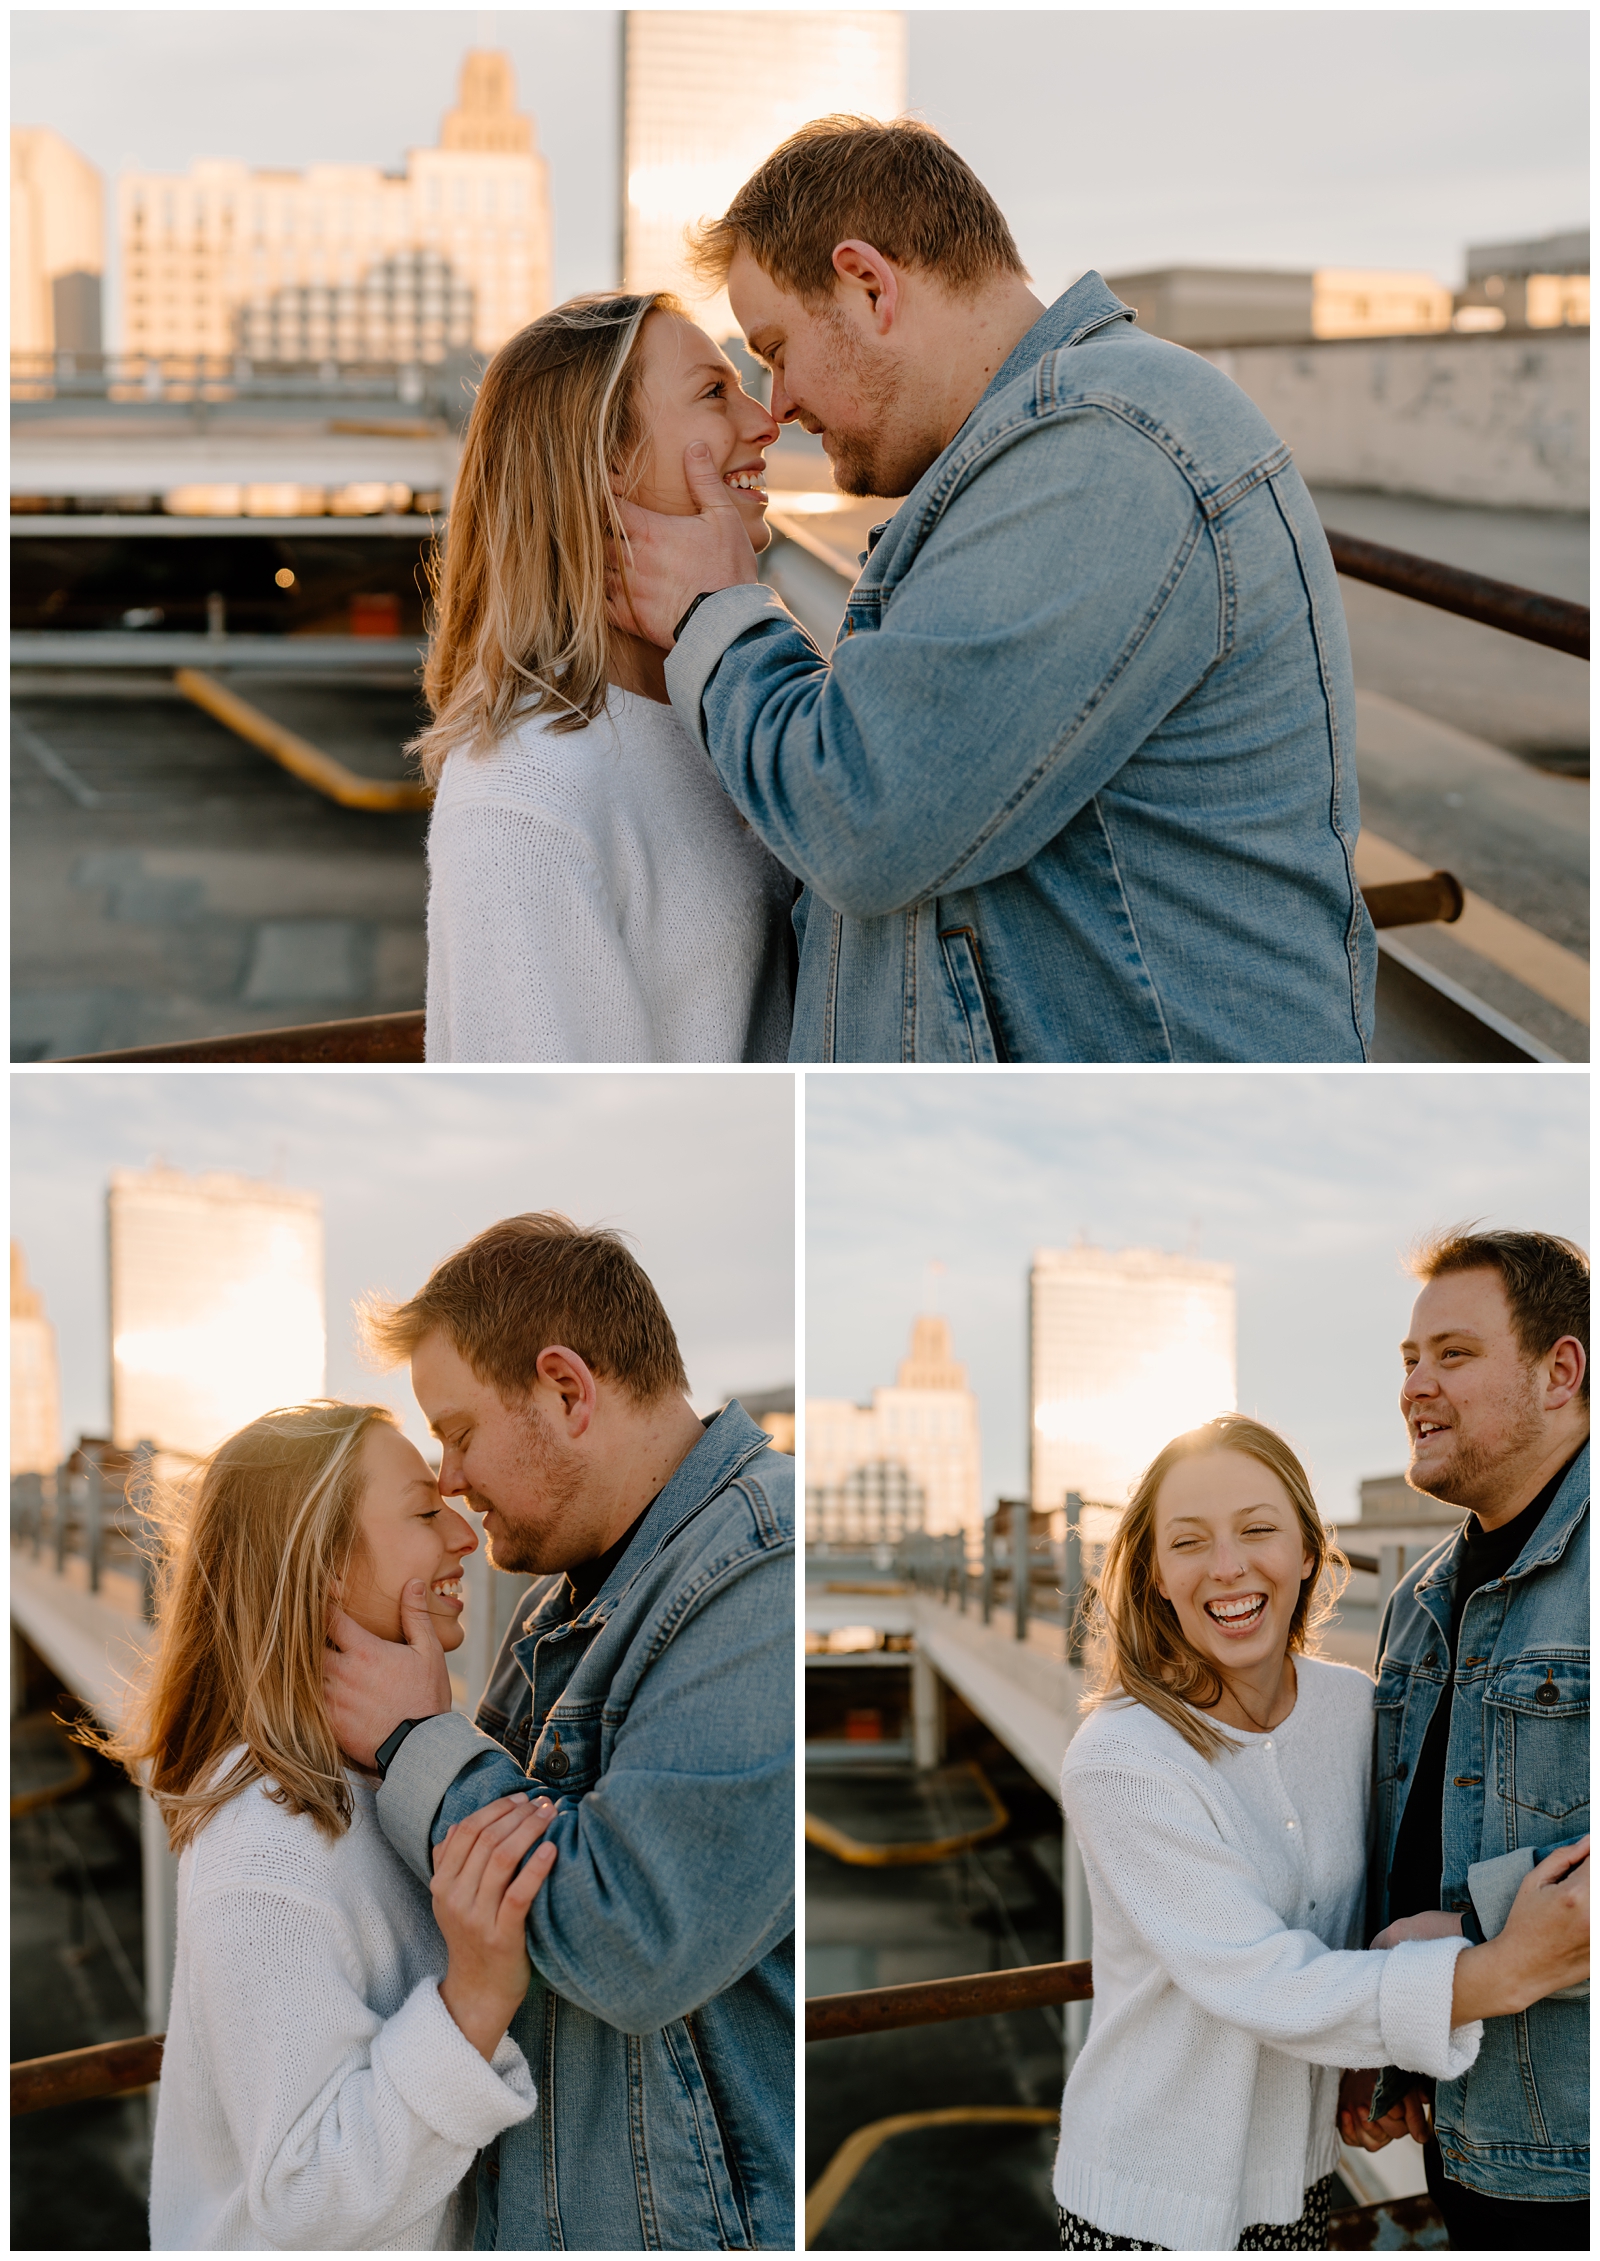 Cute and romantic engagement photos in Winston-Salem by NC elopement photographer